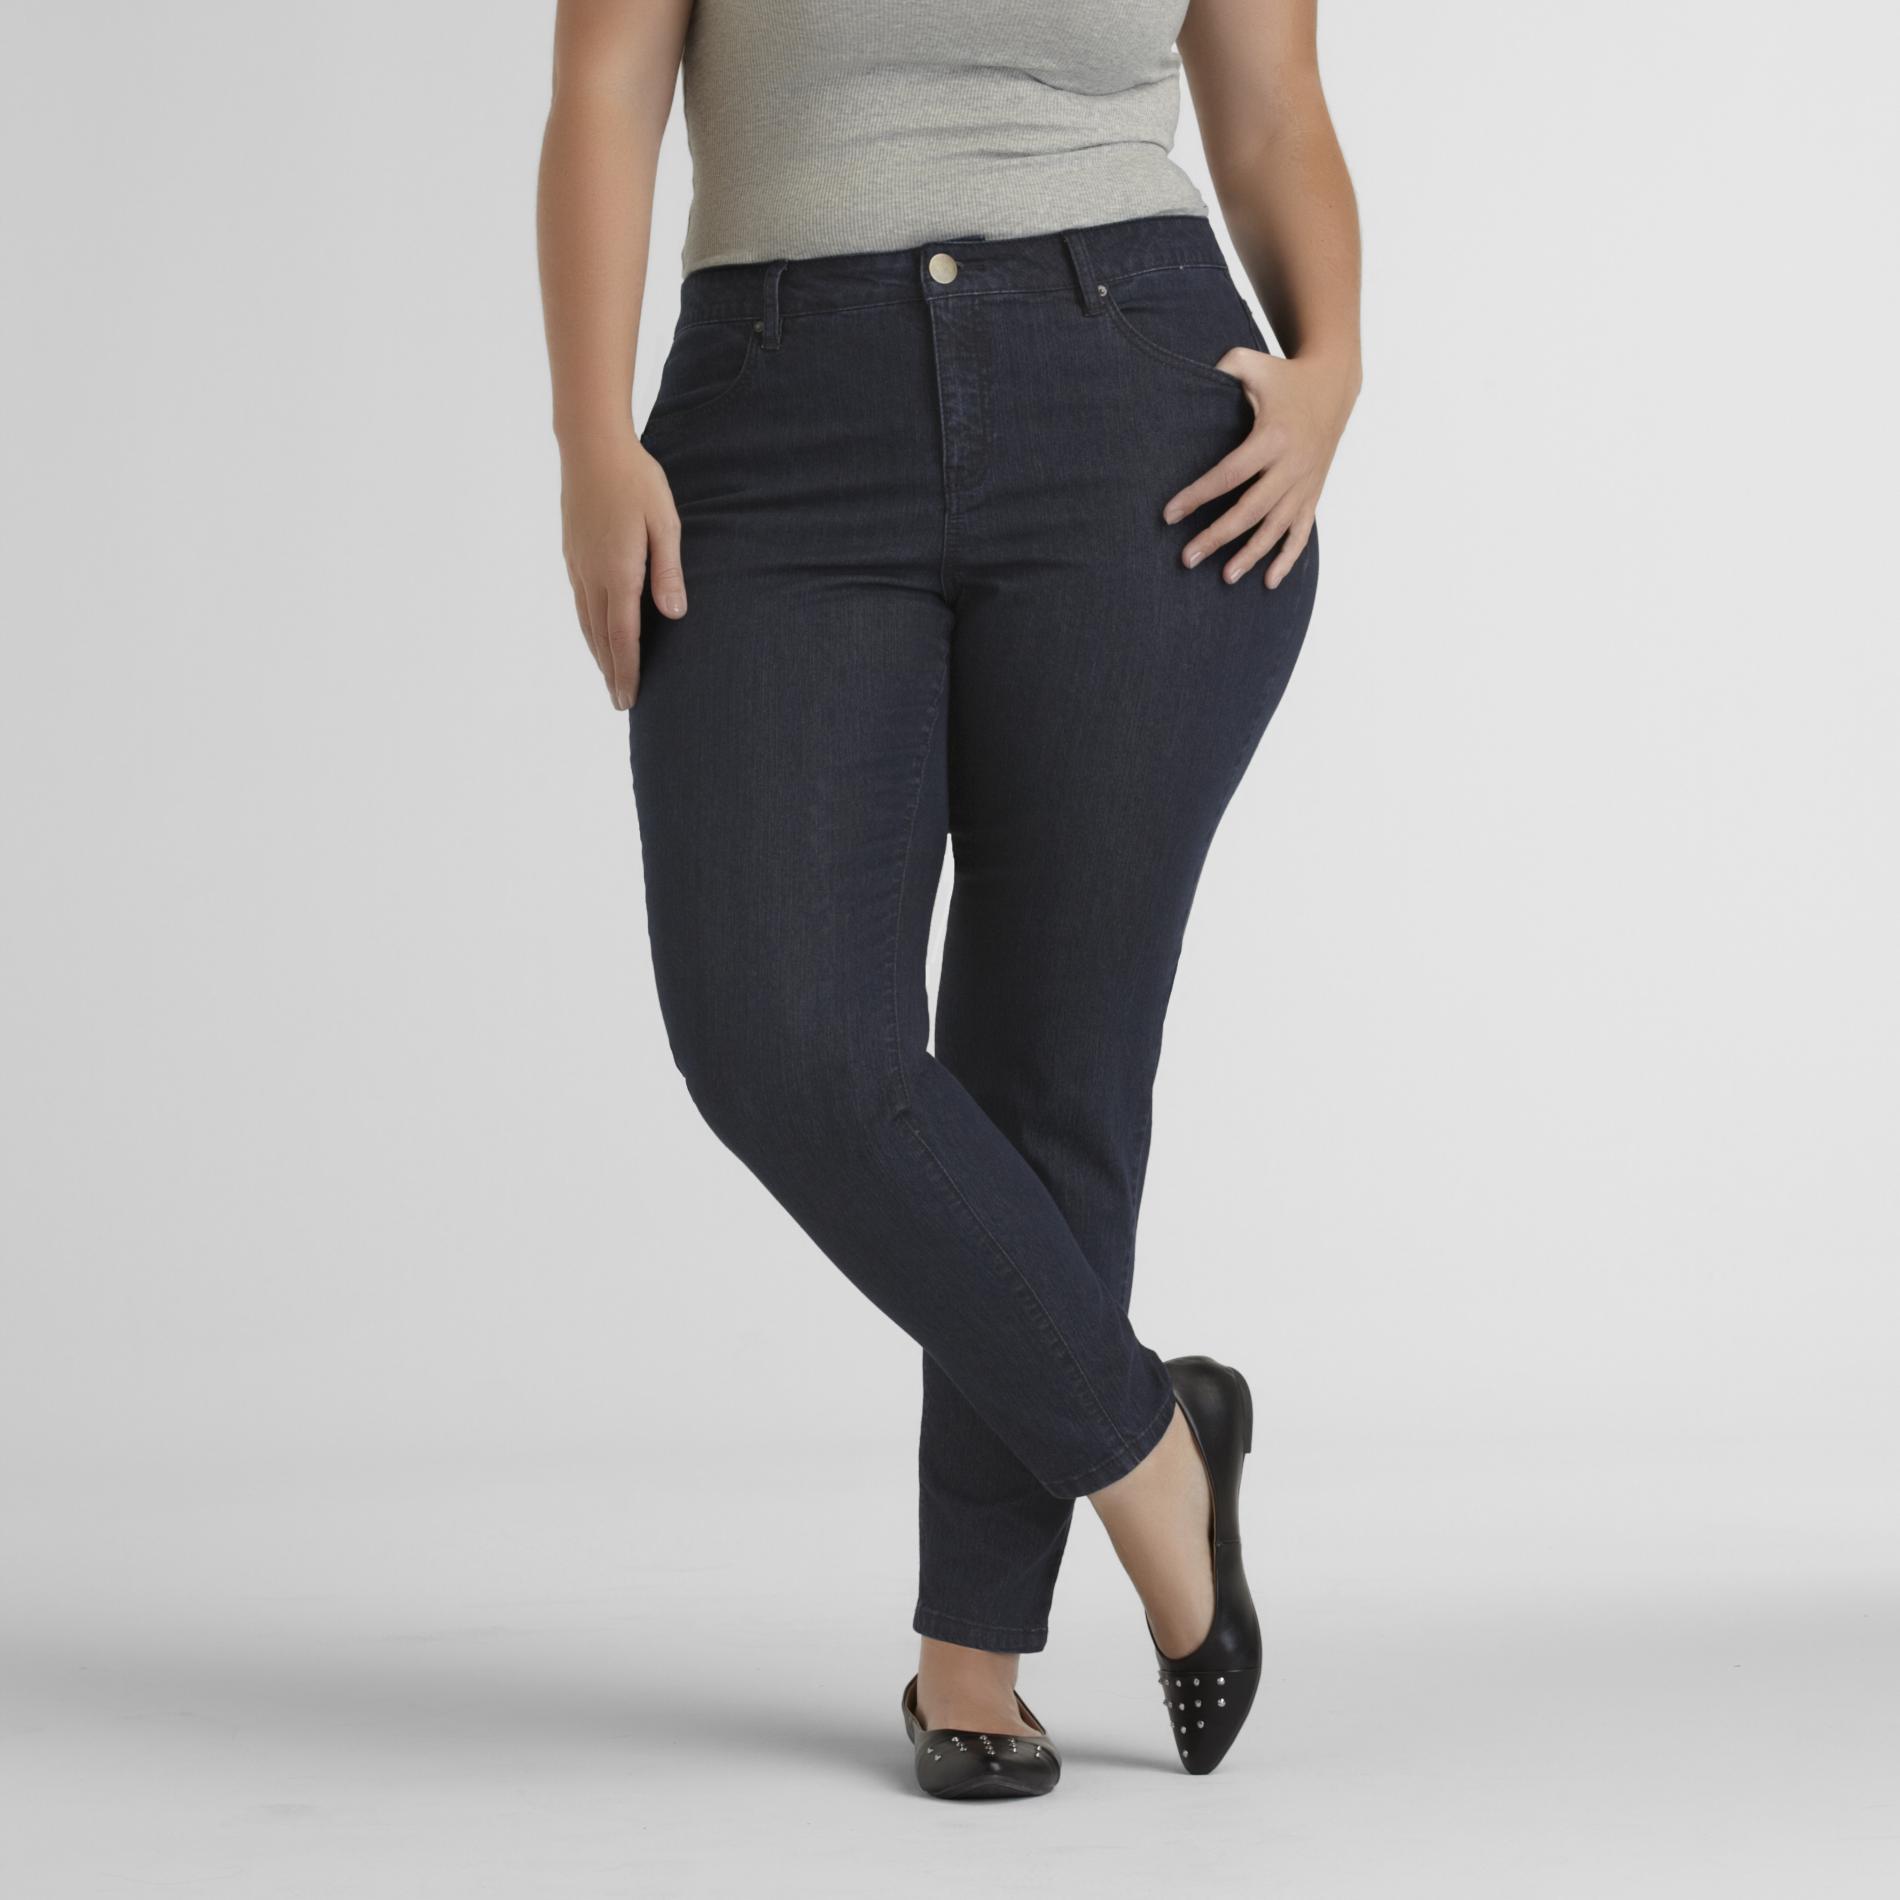 Love Your Style, Love Your Size Women's Plus Stretch Denim Jeggings - Curvy Fit